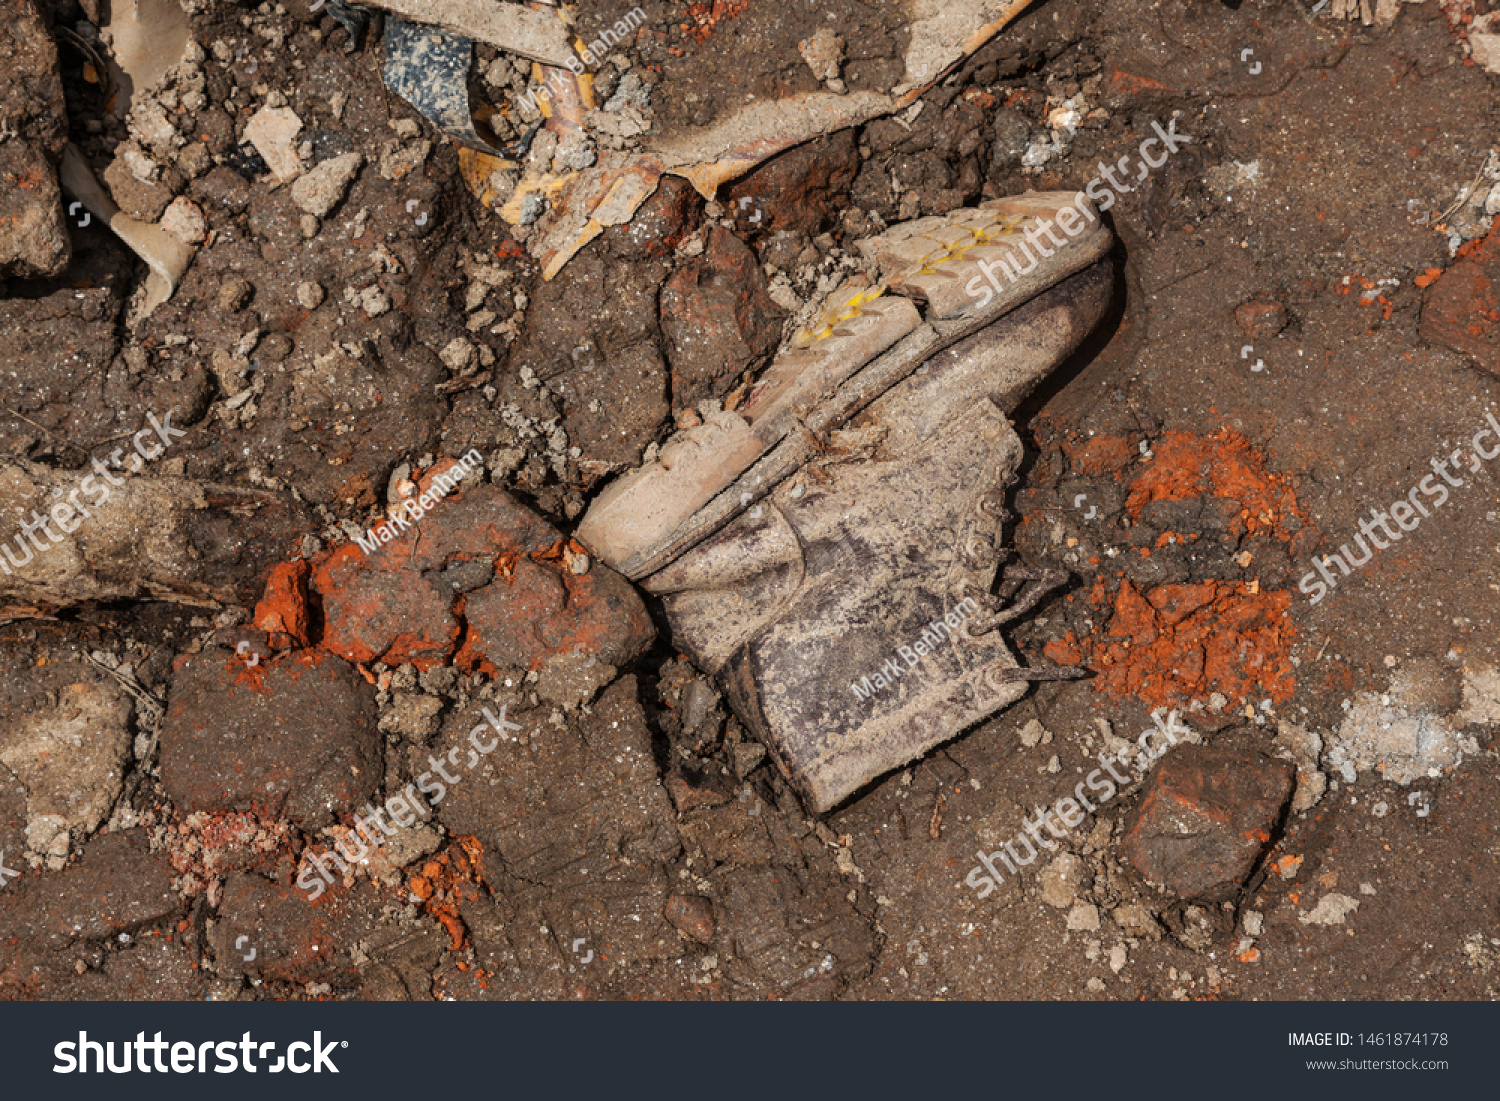 Single boot pushed into the ground found amongst dirt and rubble after the earthquake in Kathmandu n 2015 #1461874178